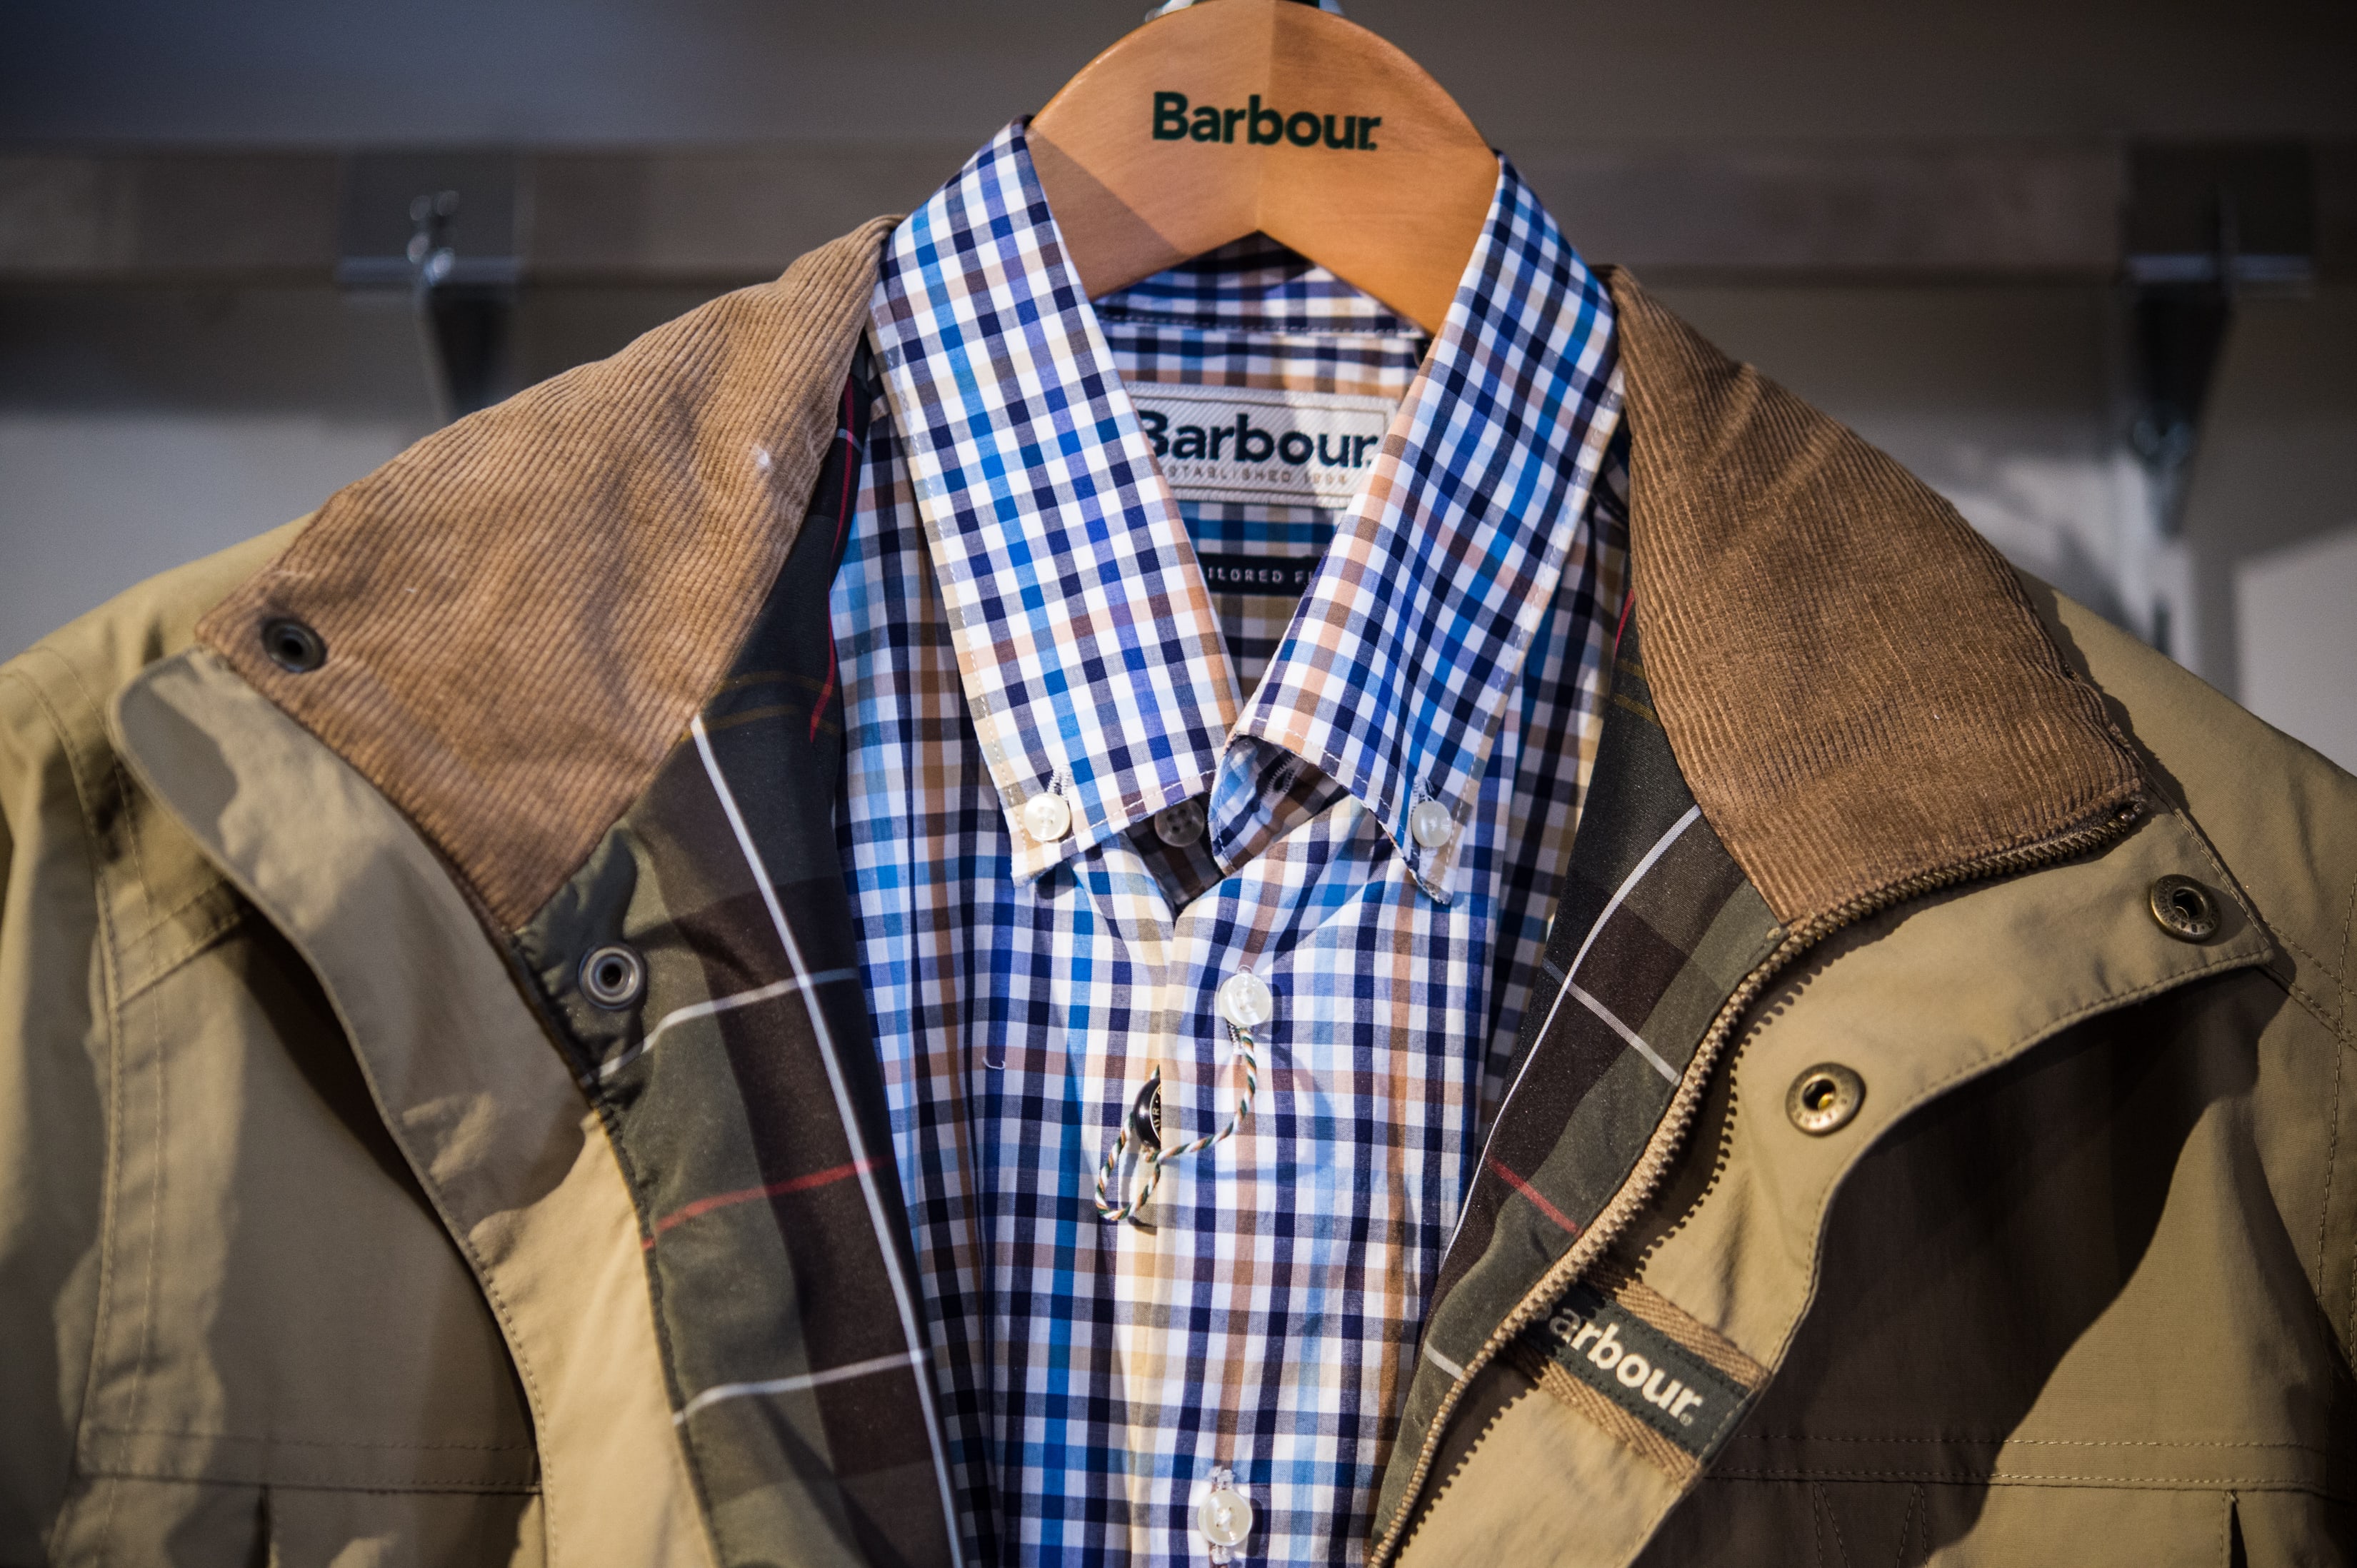 Barbour | A British clothing store